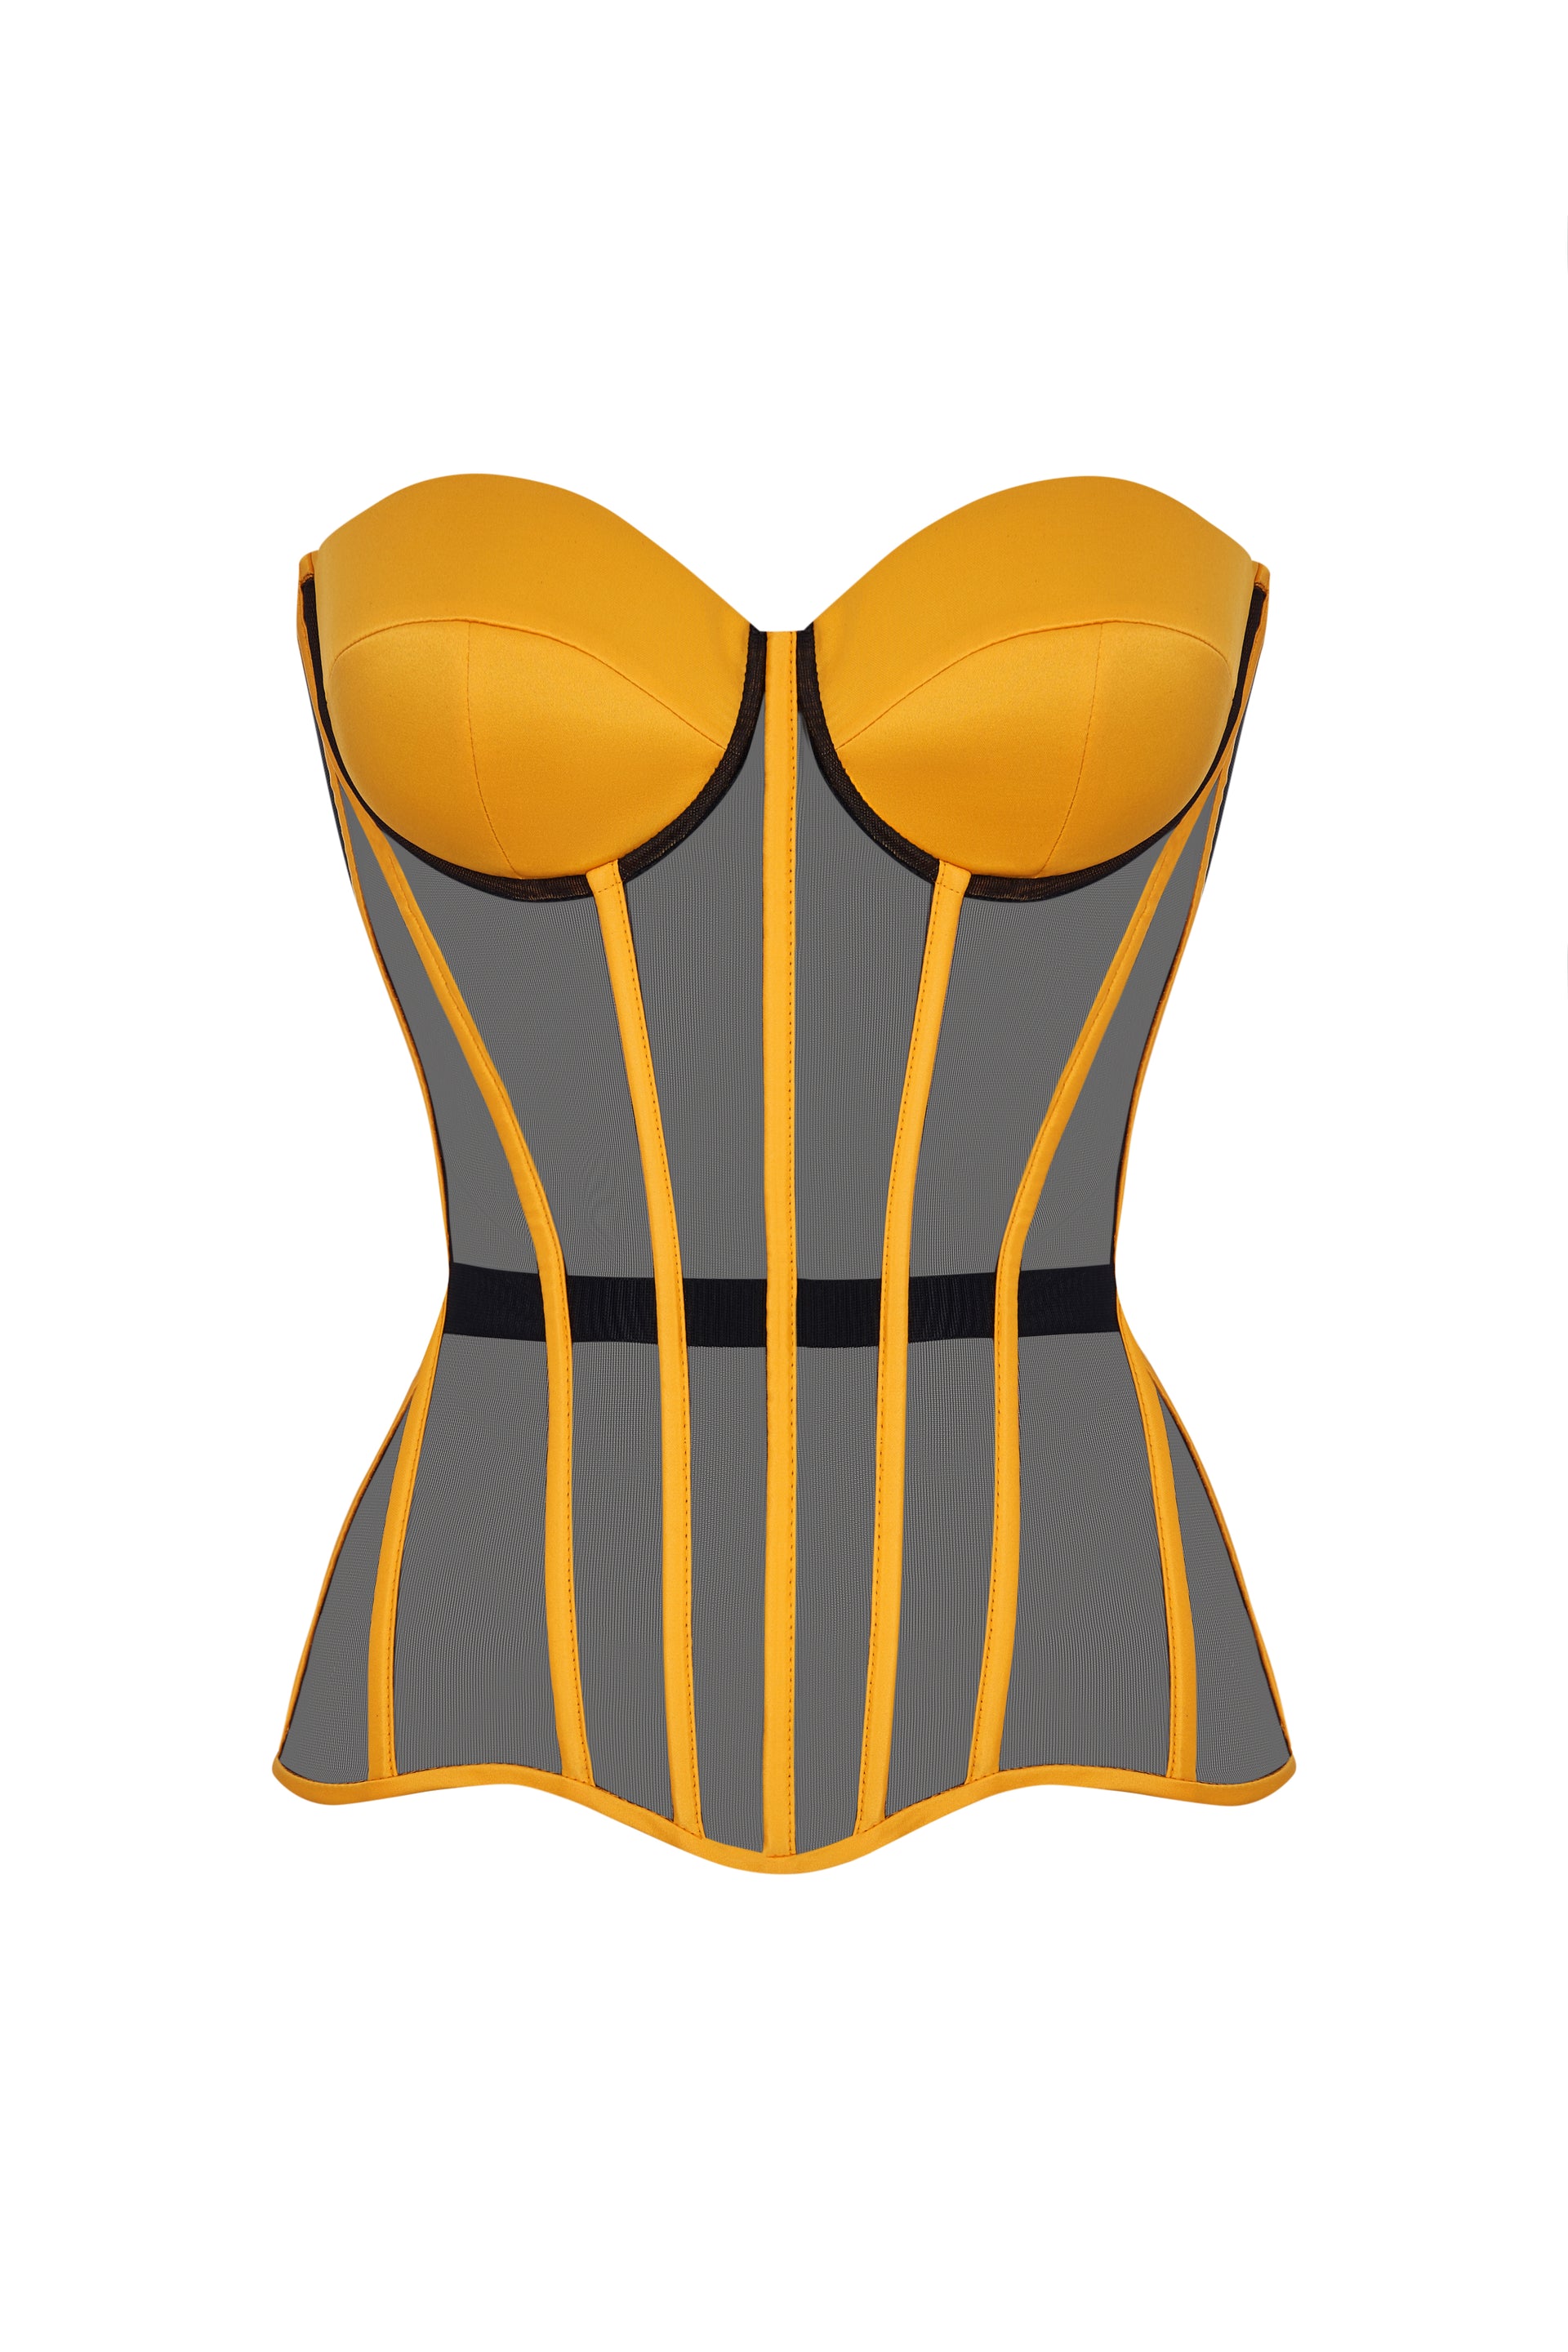 Black corset with yellow reliefs